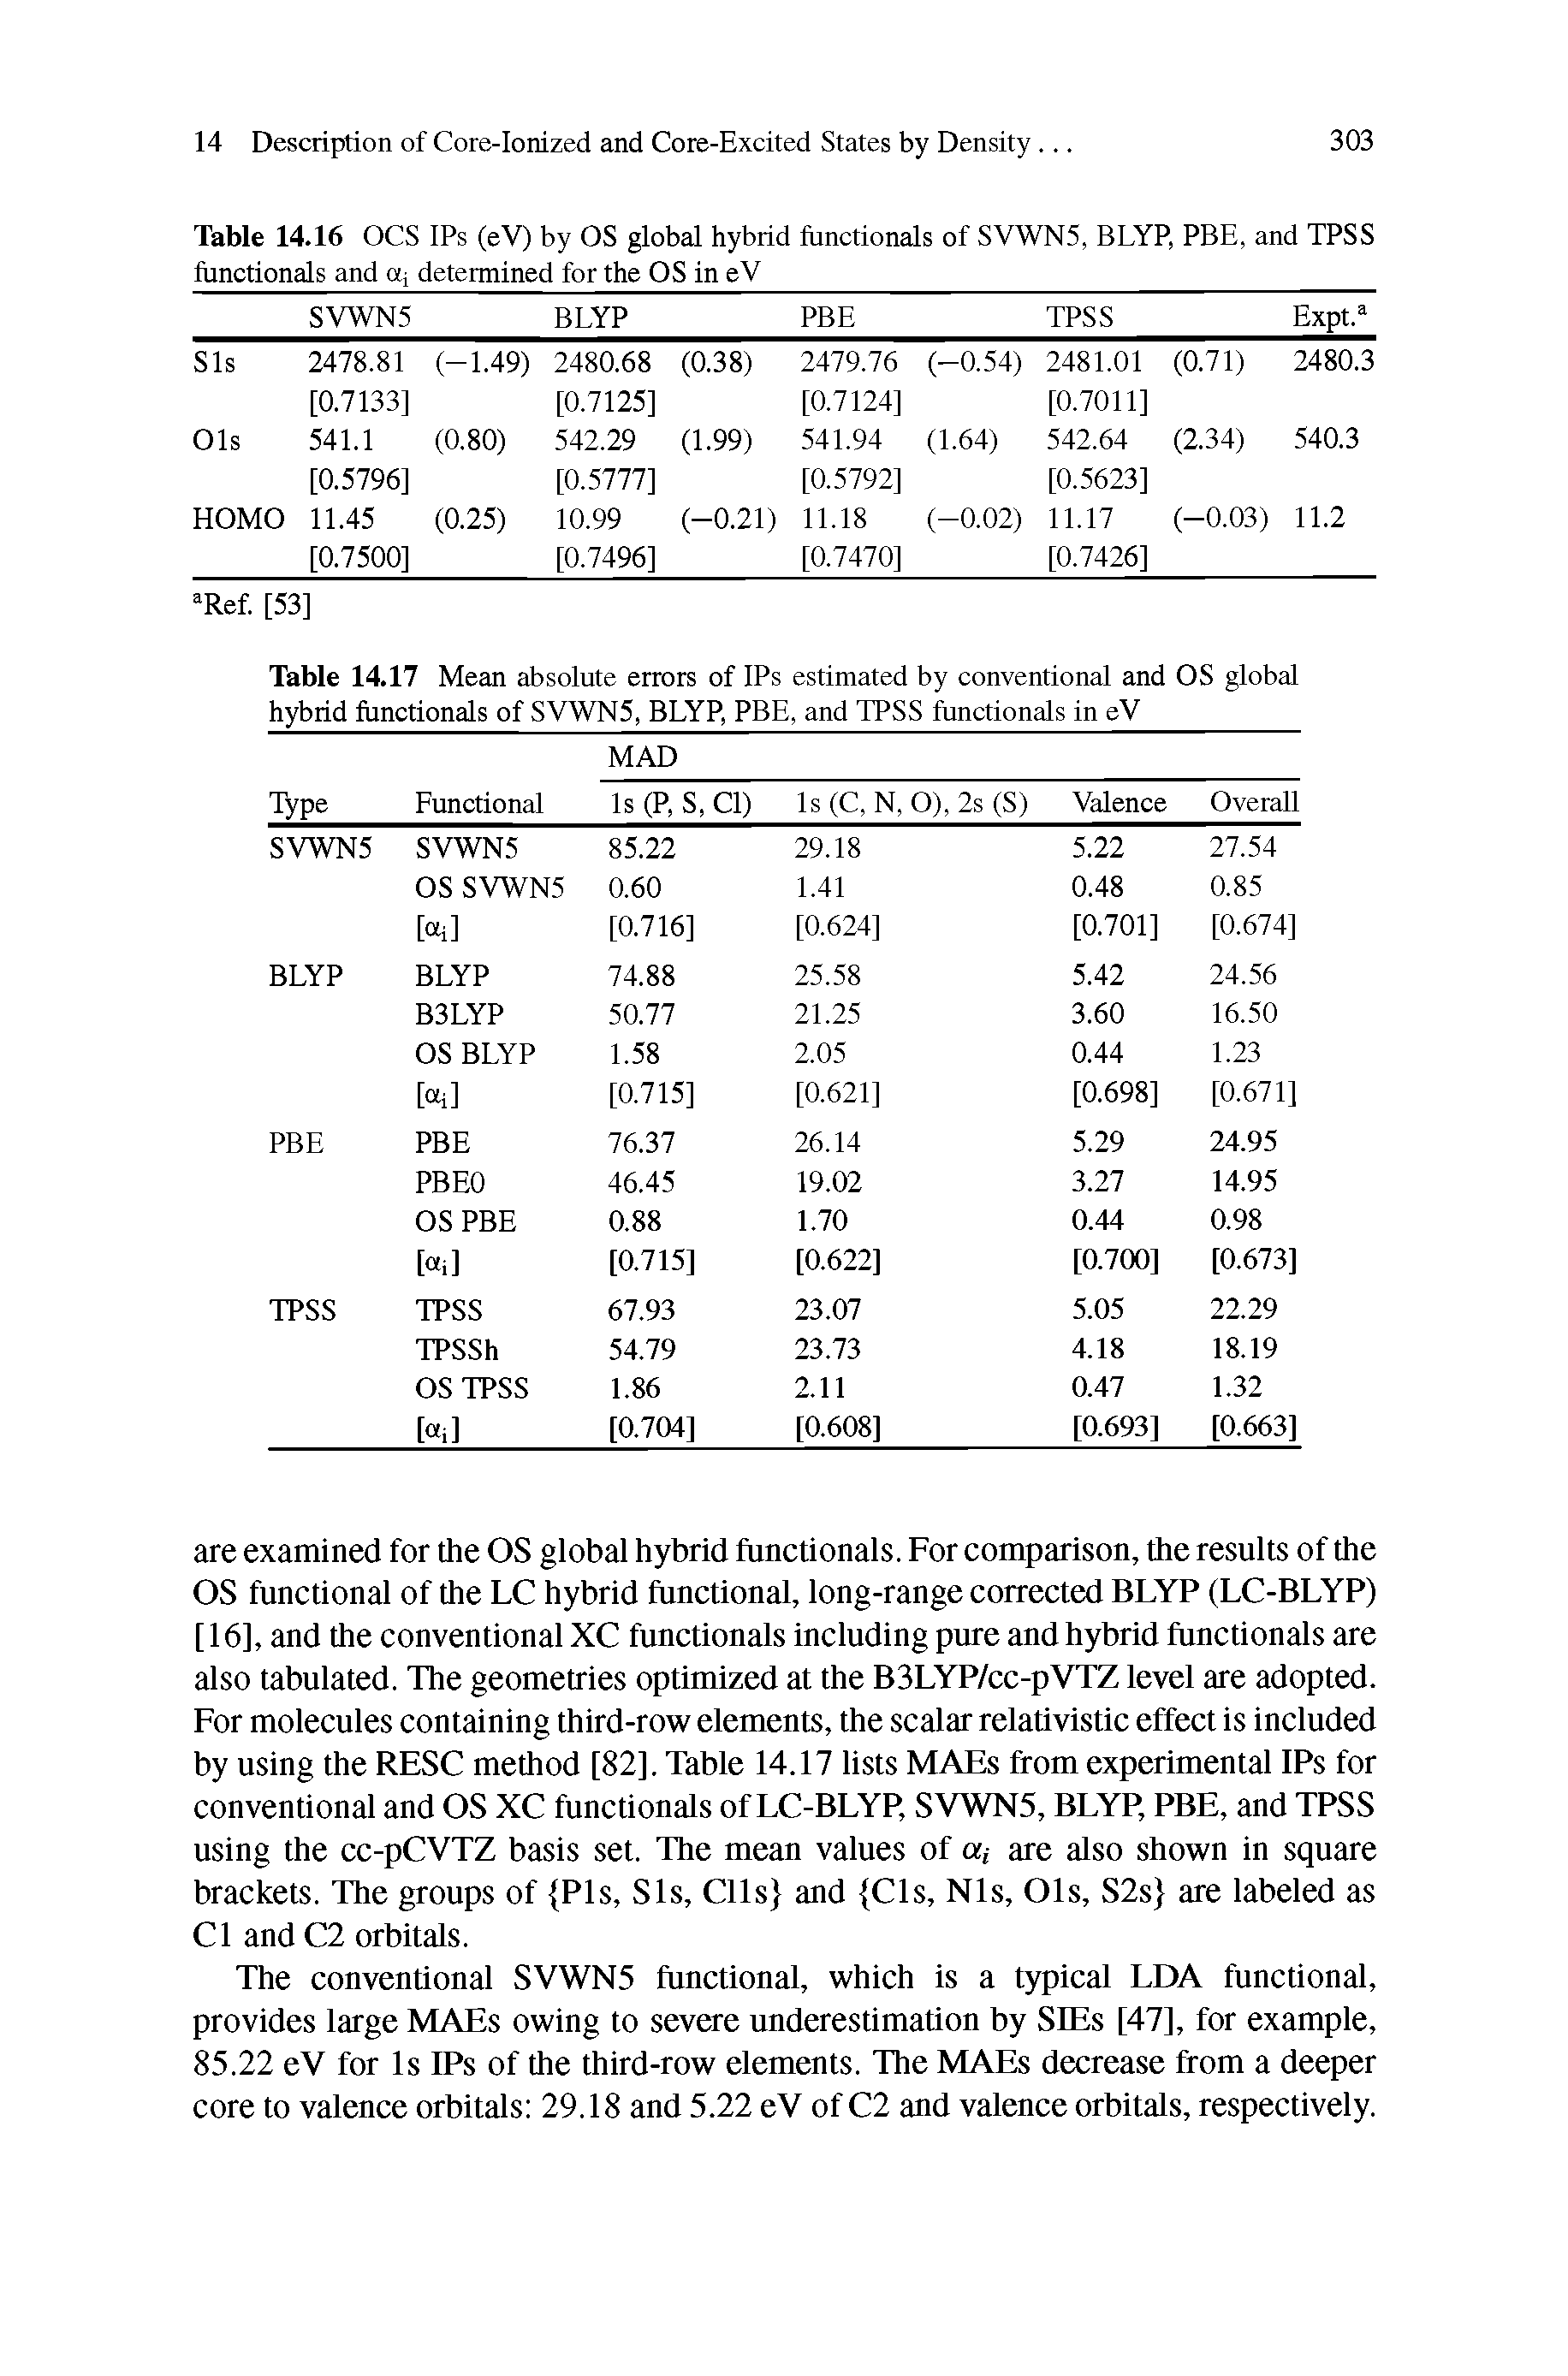 Table 14.16 OCS IPs (eV) by OS global hybrid functionals of SVWN5, BLYP, PBE, and TPSS functionals and Oj determined for the OS in eV...